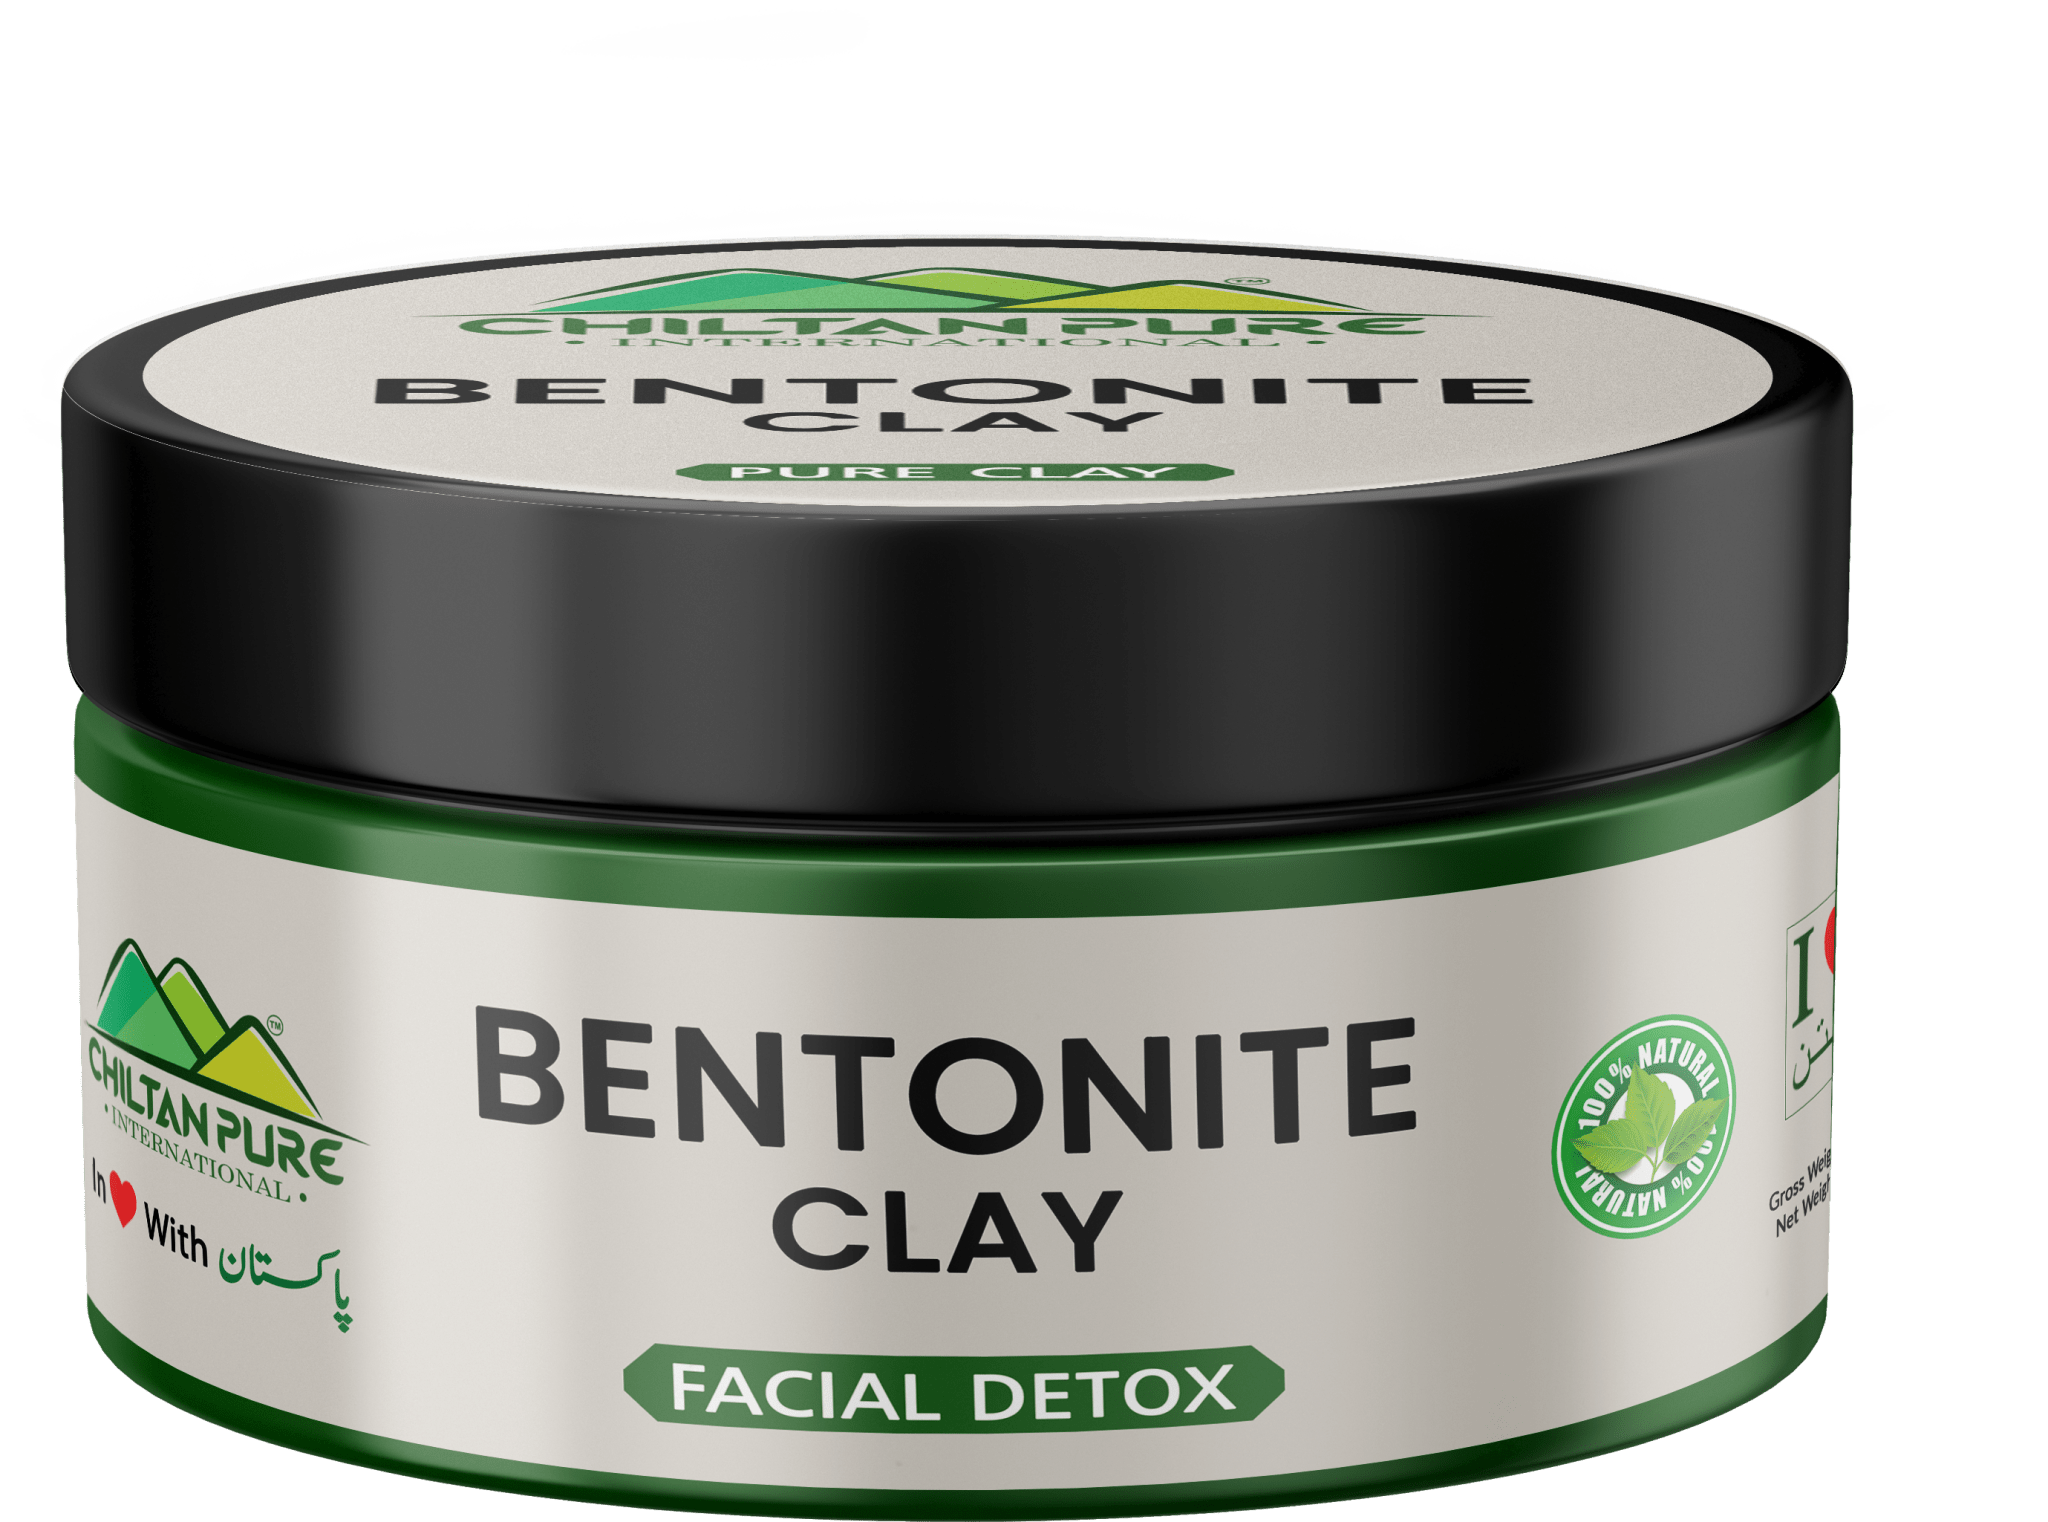 Bentonite Clay – The Powerful Absorbent [For Oily Skin] 100gm - ChiltanPure